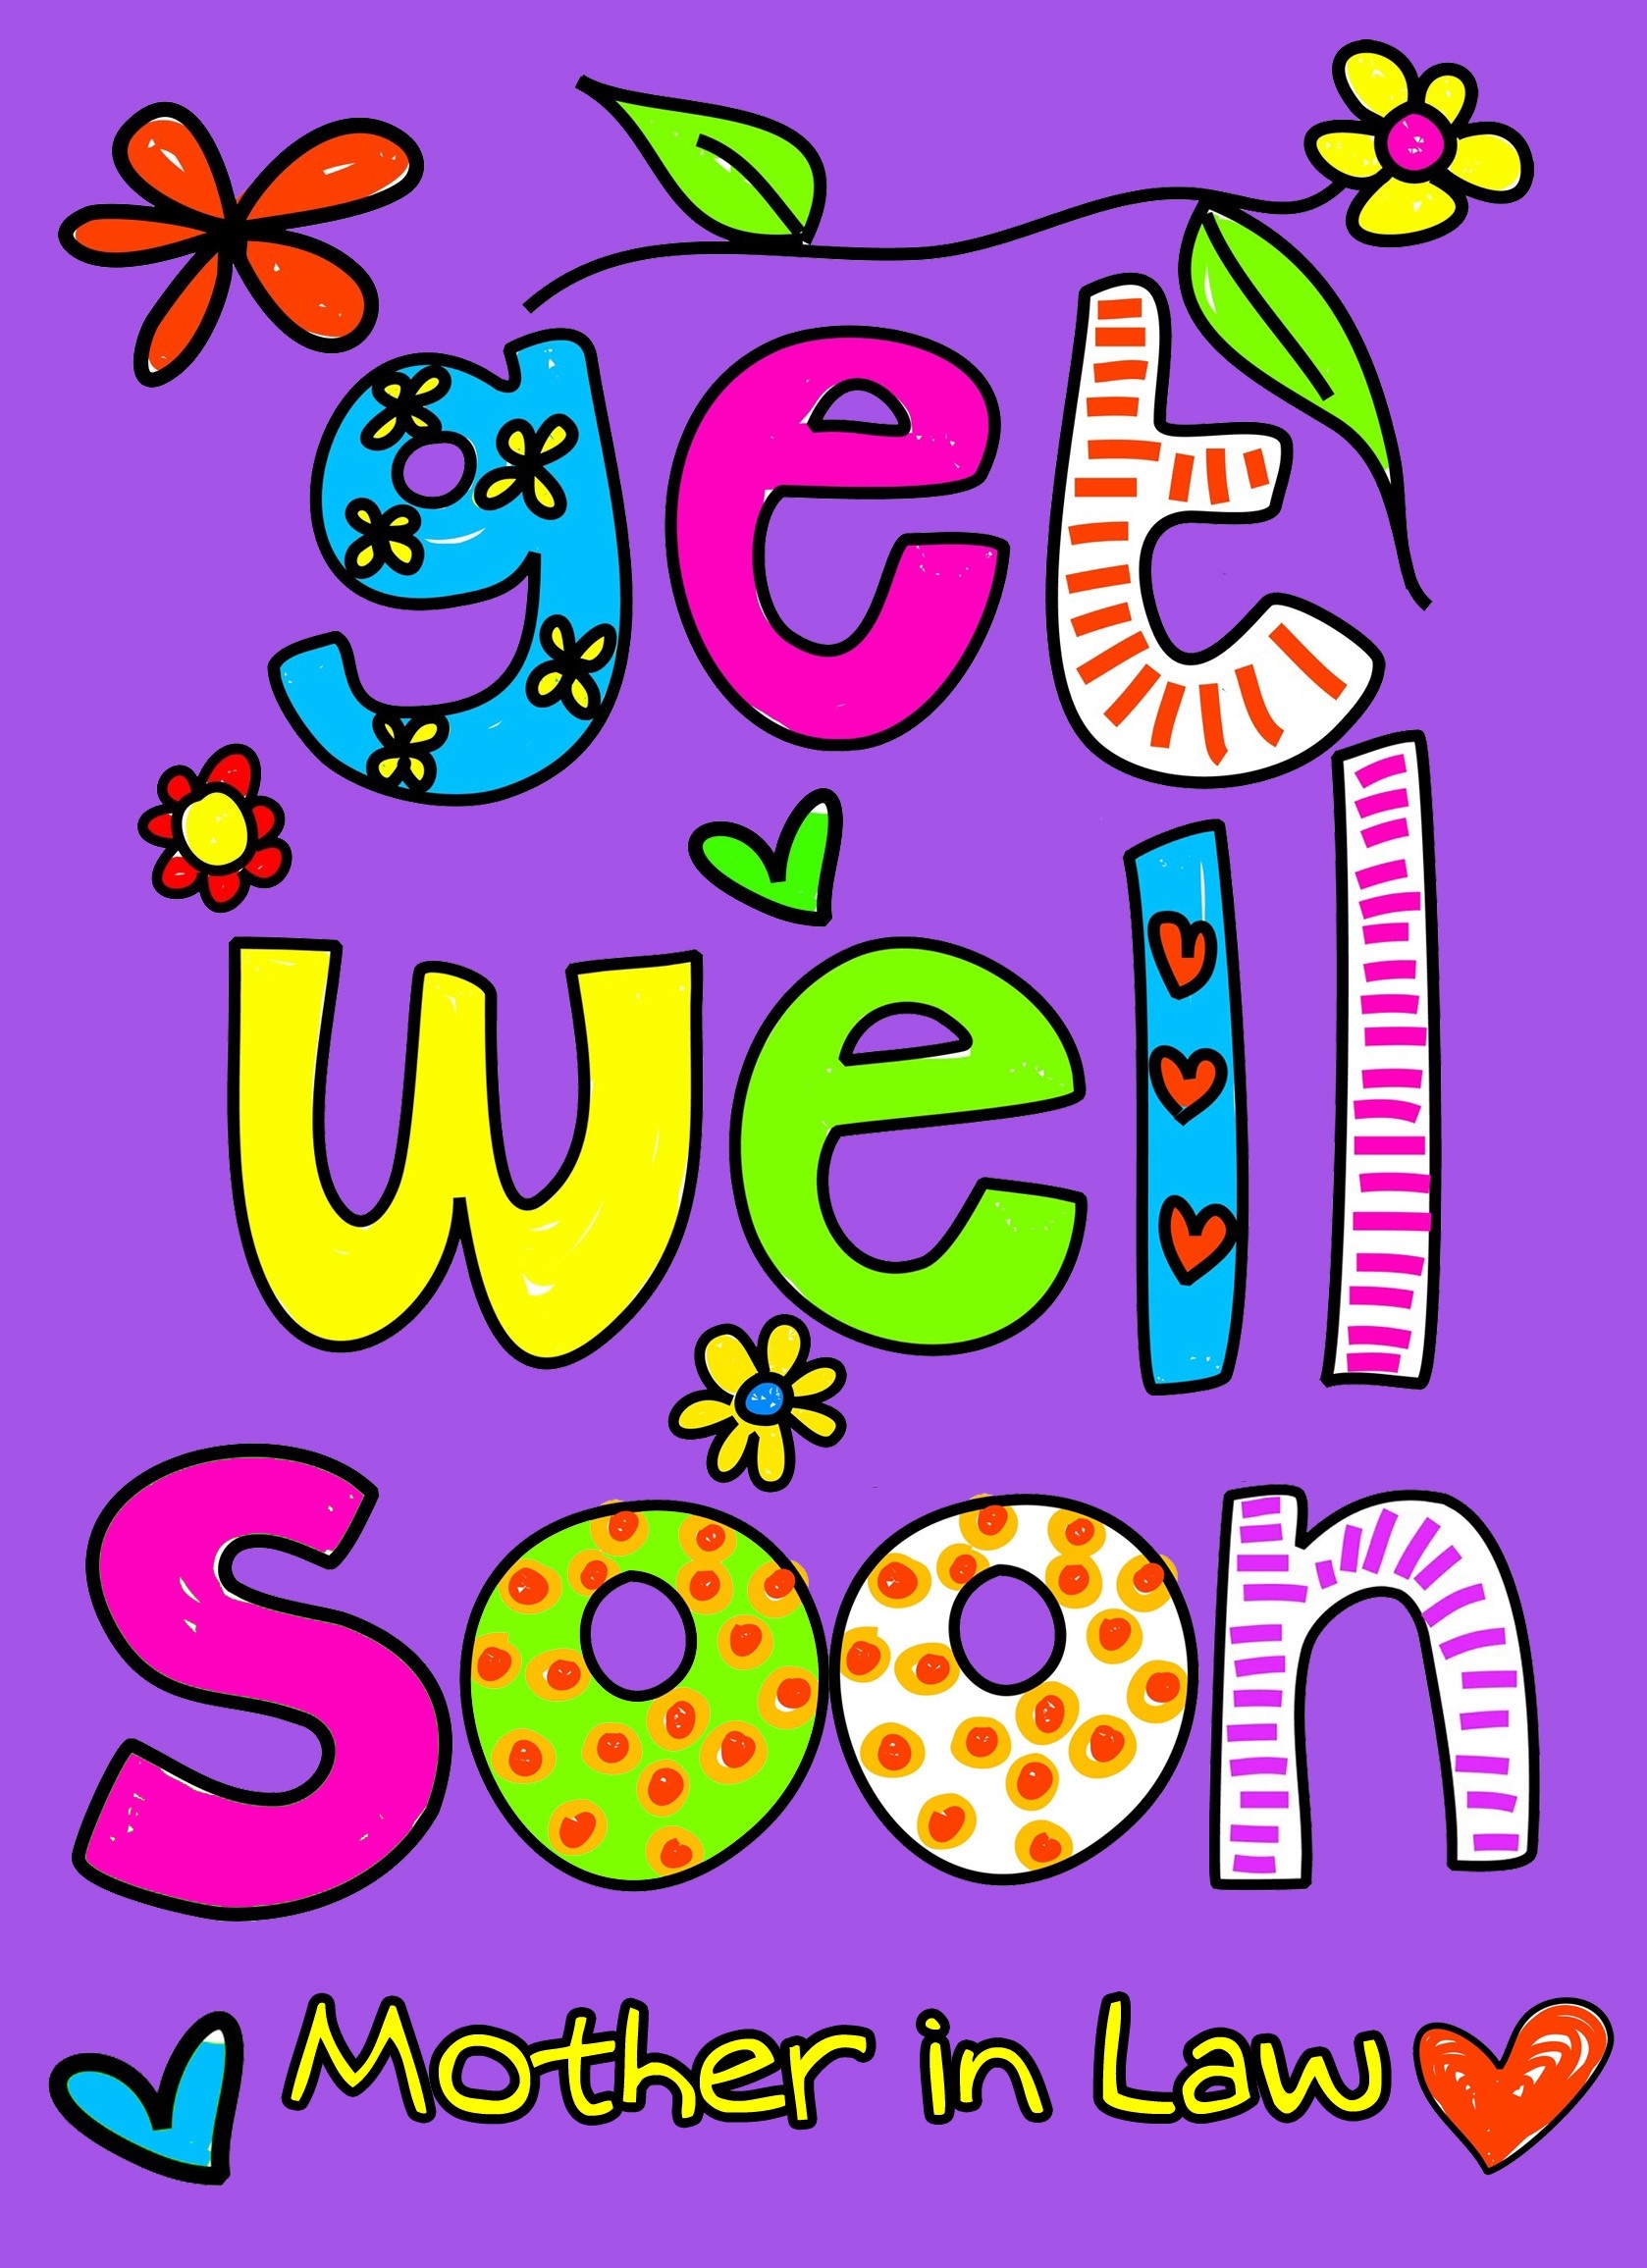 Get Well Soon 'Mother in Law' Greeting Card